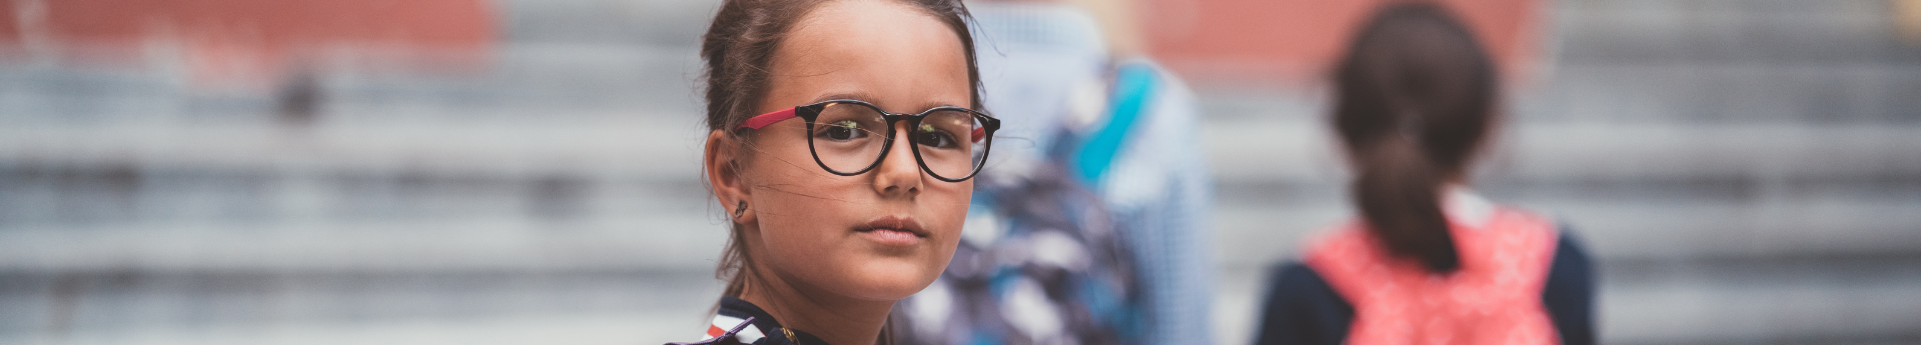 Girl with glasses outside of school